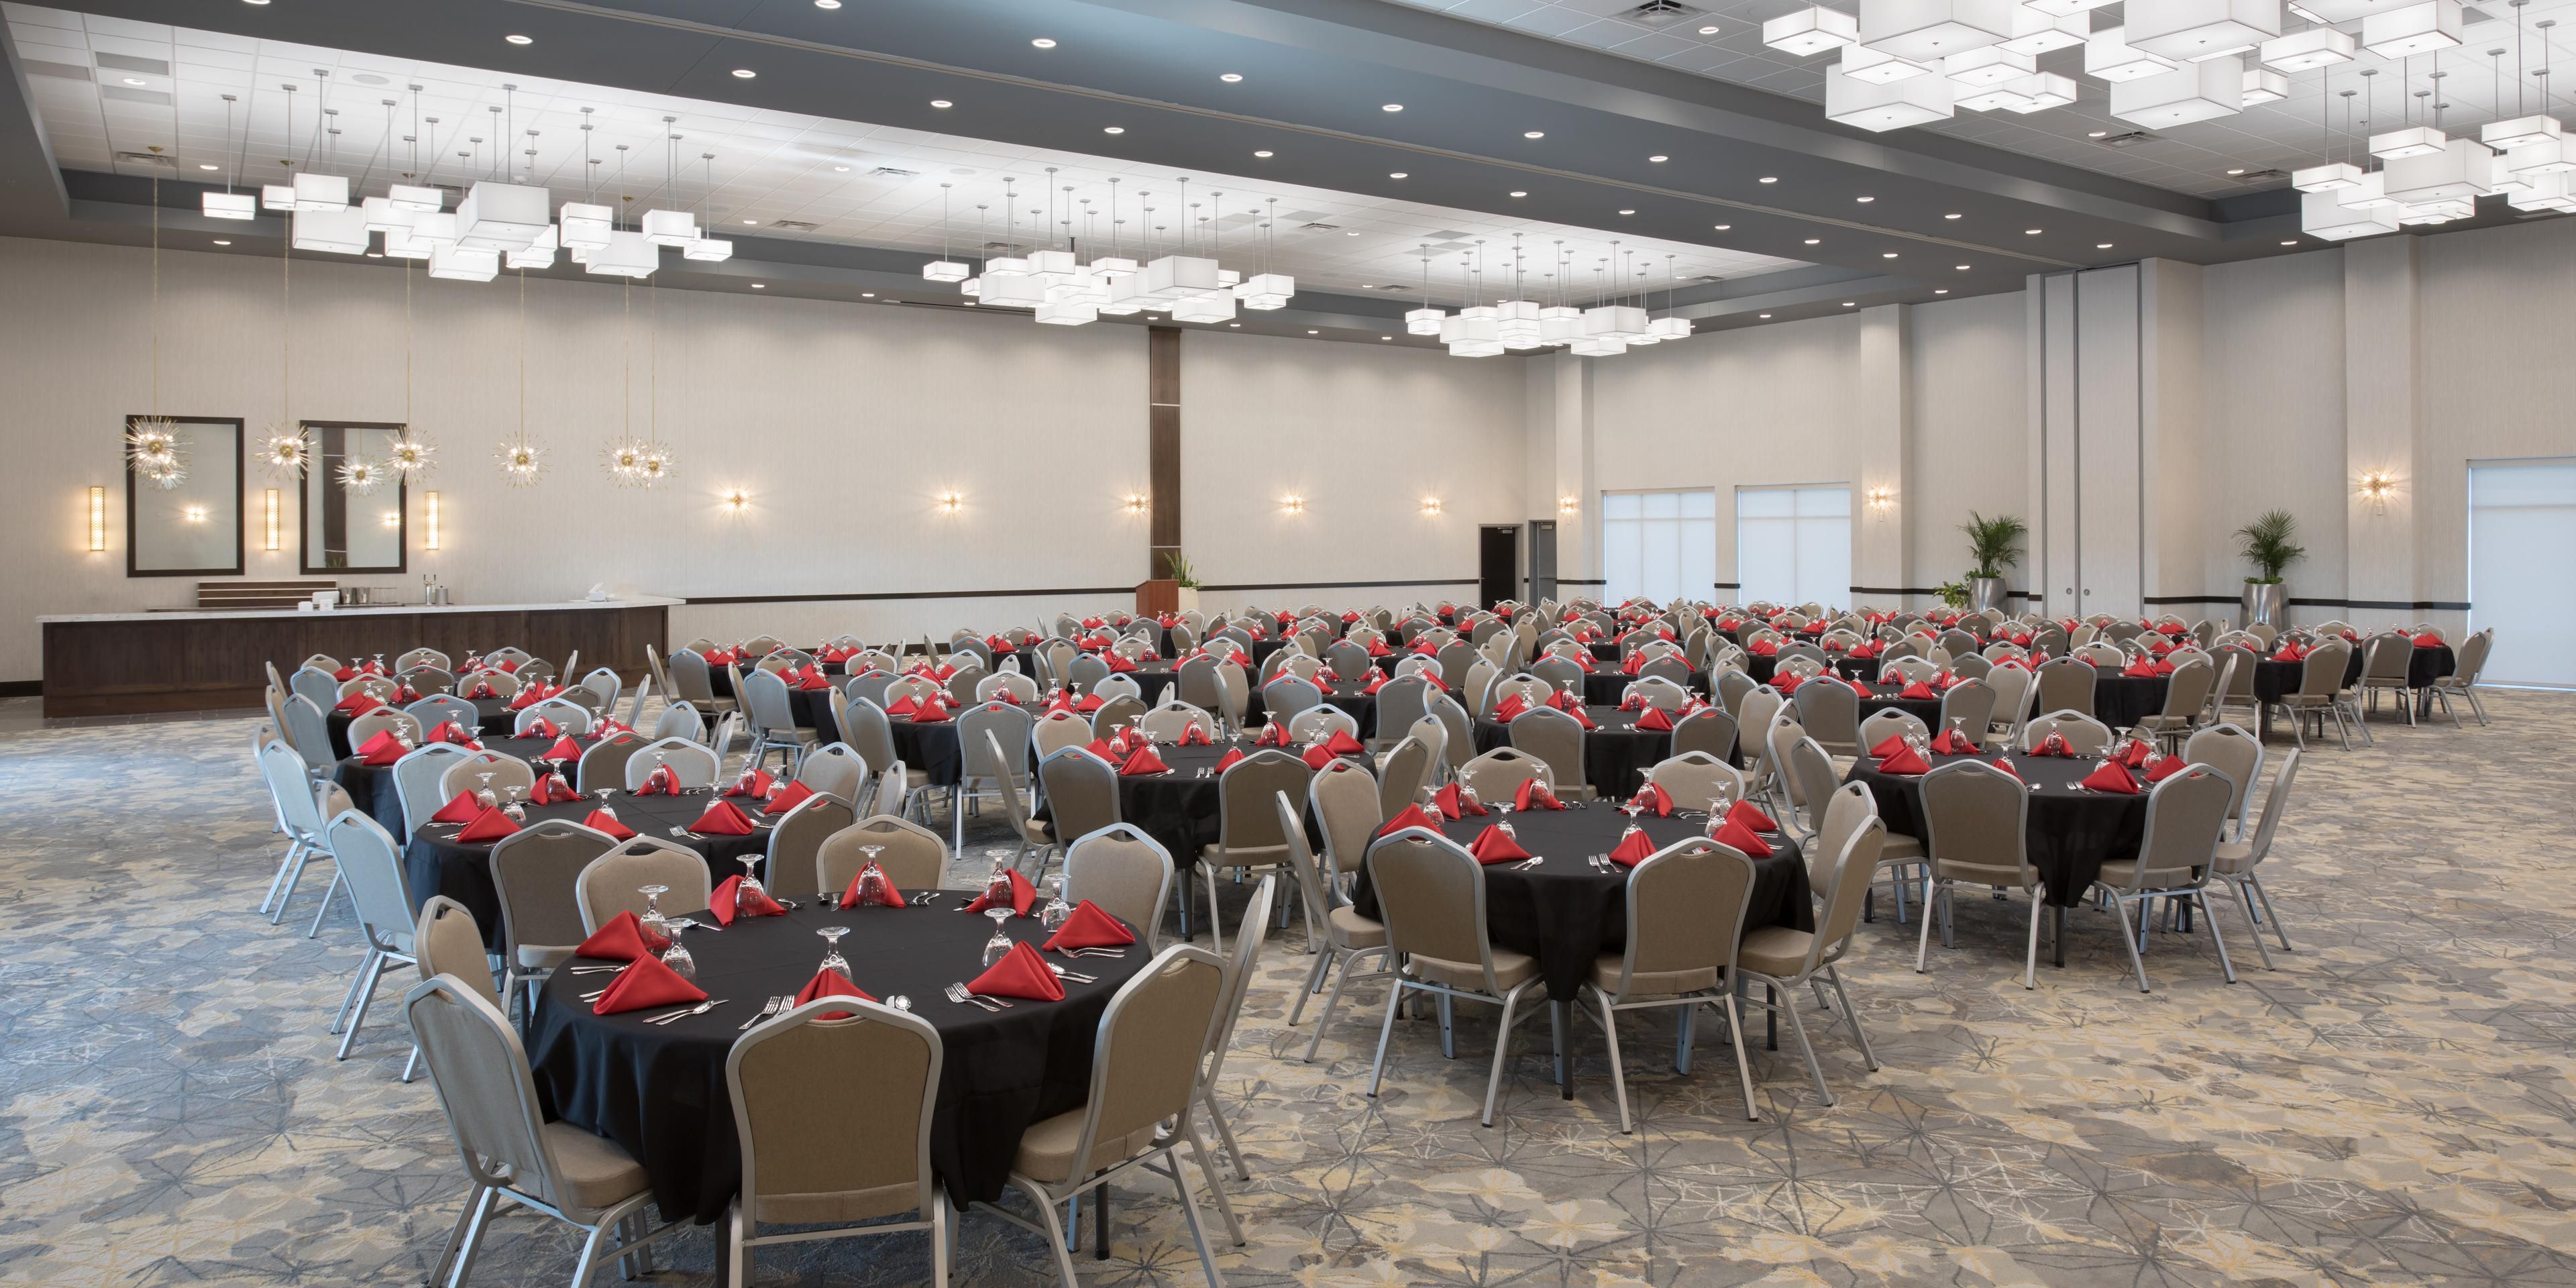 We are the perfect place to hold all of your event needs.  With over 7,000 square feet of space, we are able to hold up to 500 guests in our ballroom.  We also feature a great pre event space and a peaceful outdoor seating space with a firepit.  Call today to schedule your wedding, corporate event, dance, etc.  All are welcome!